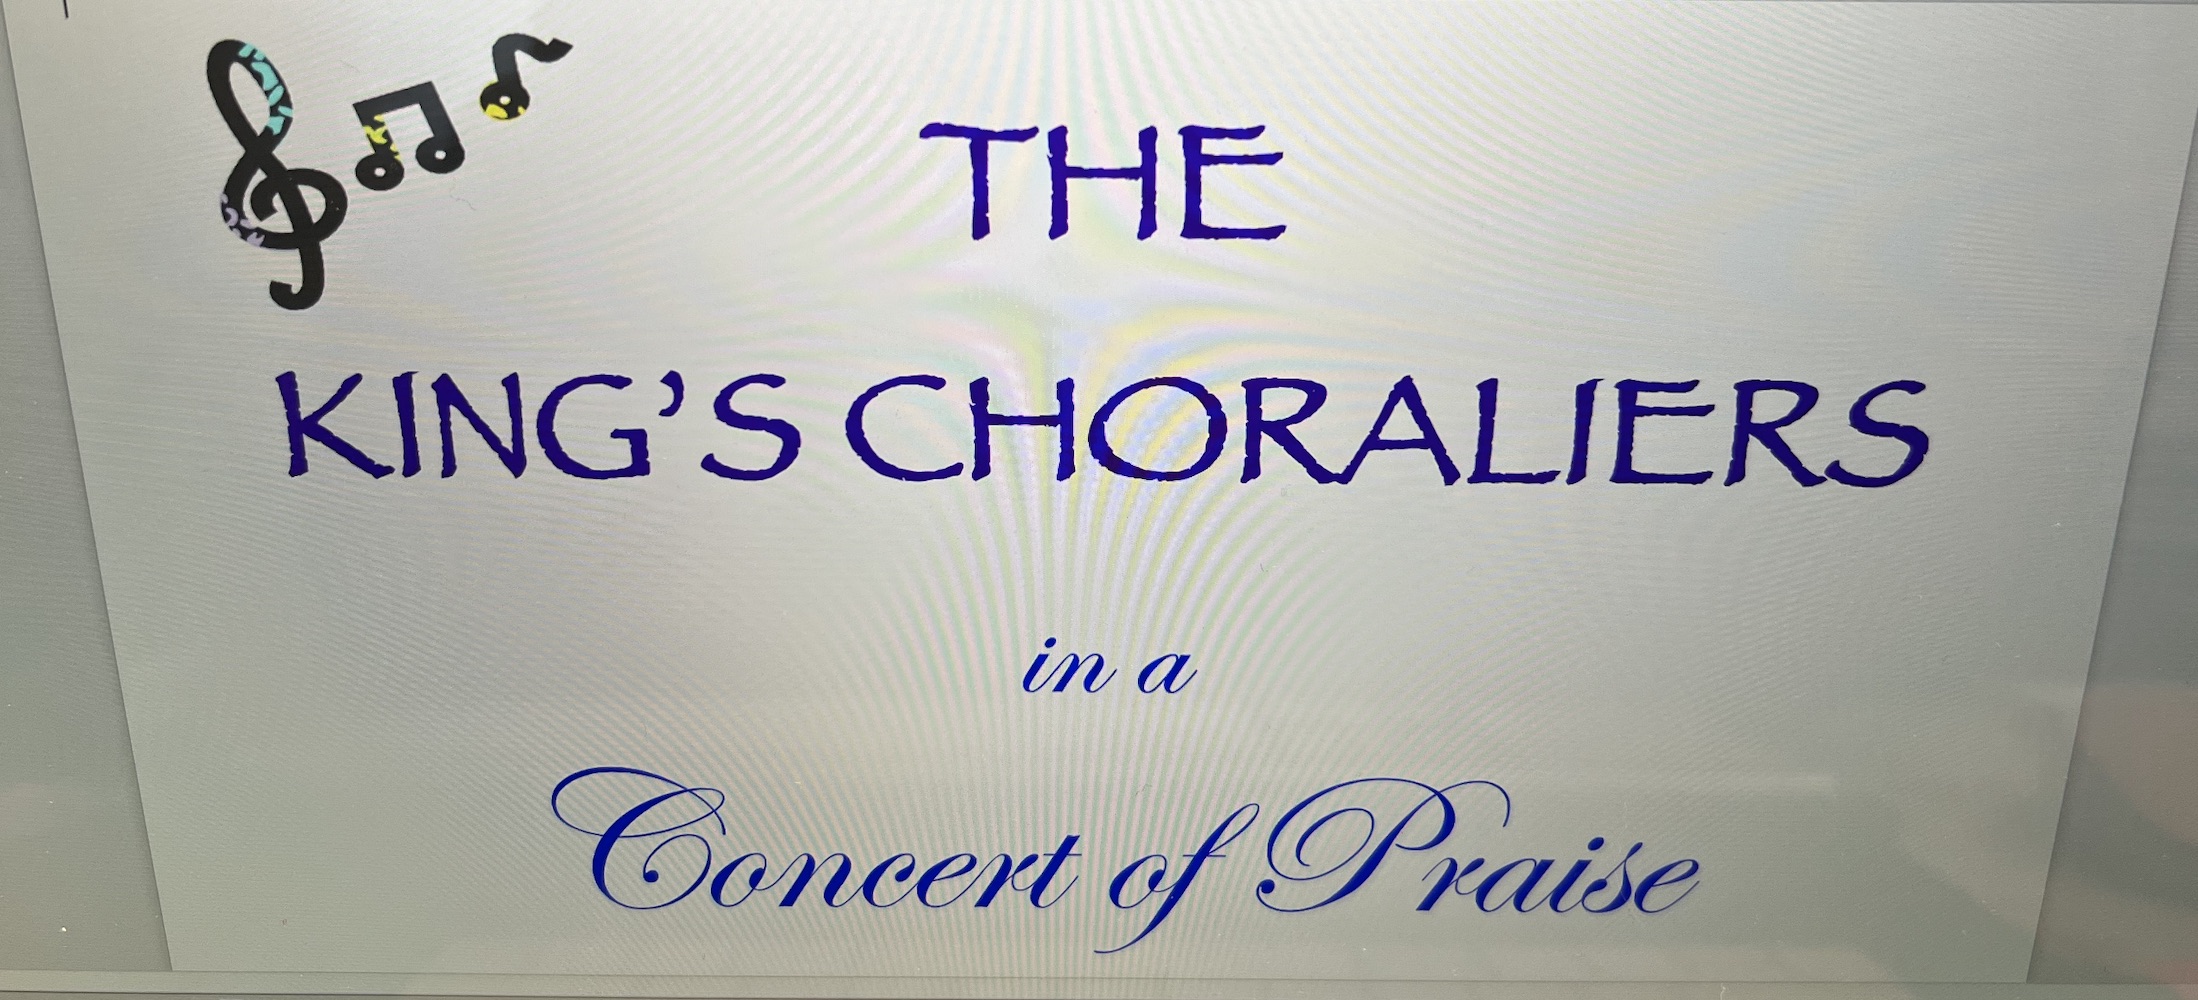 Read more about the article The King’s Choraliers’ Concert of Praise